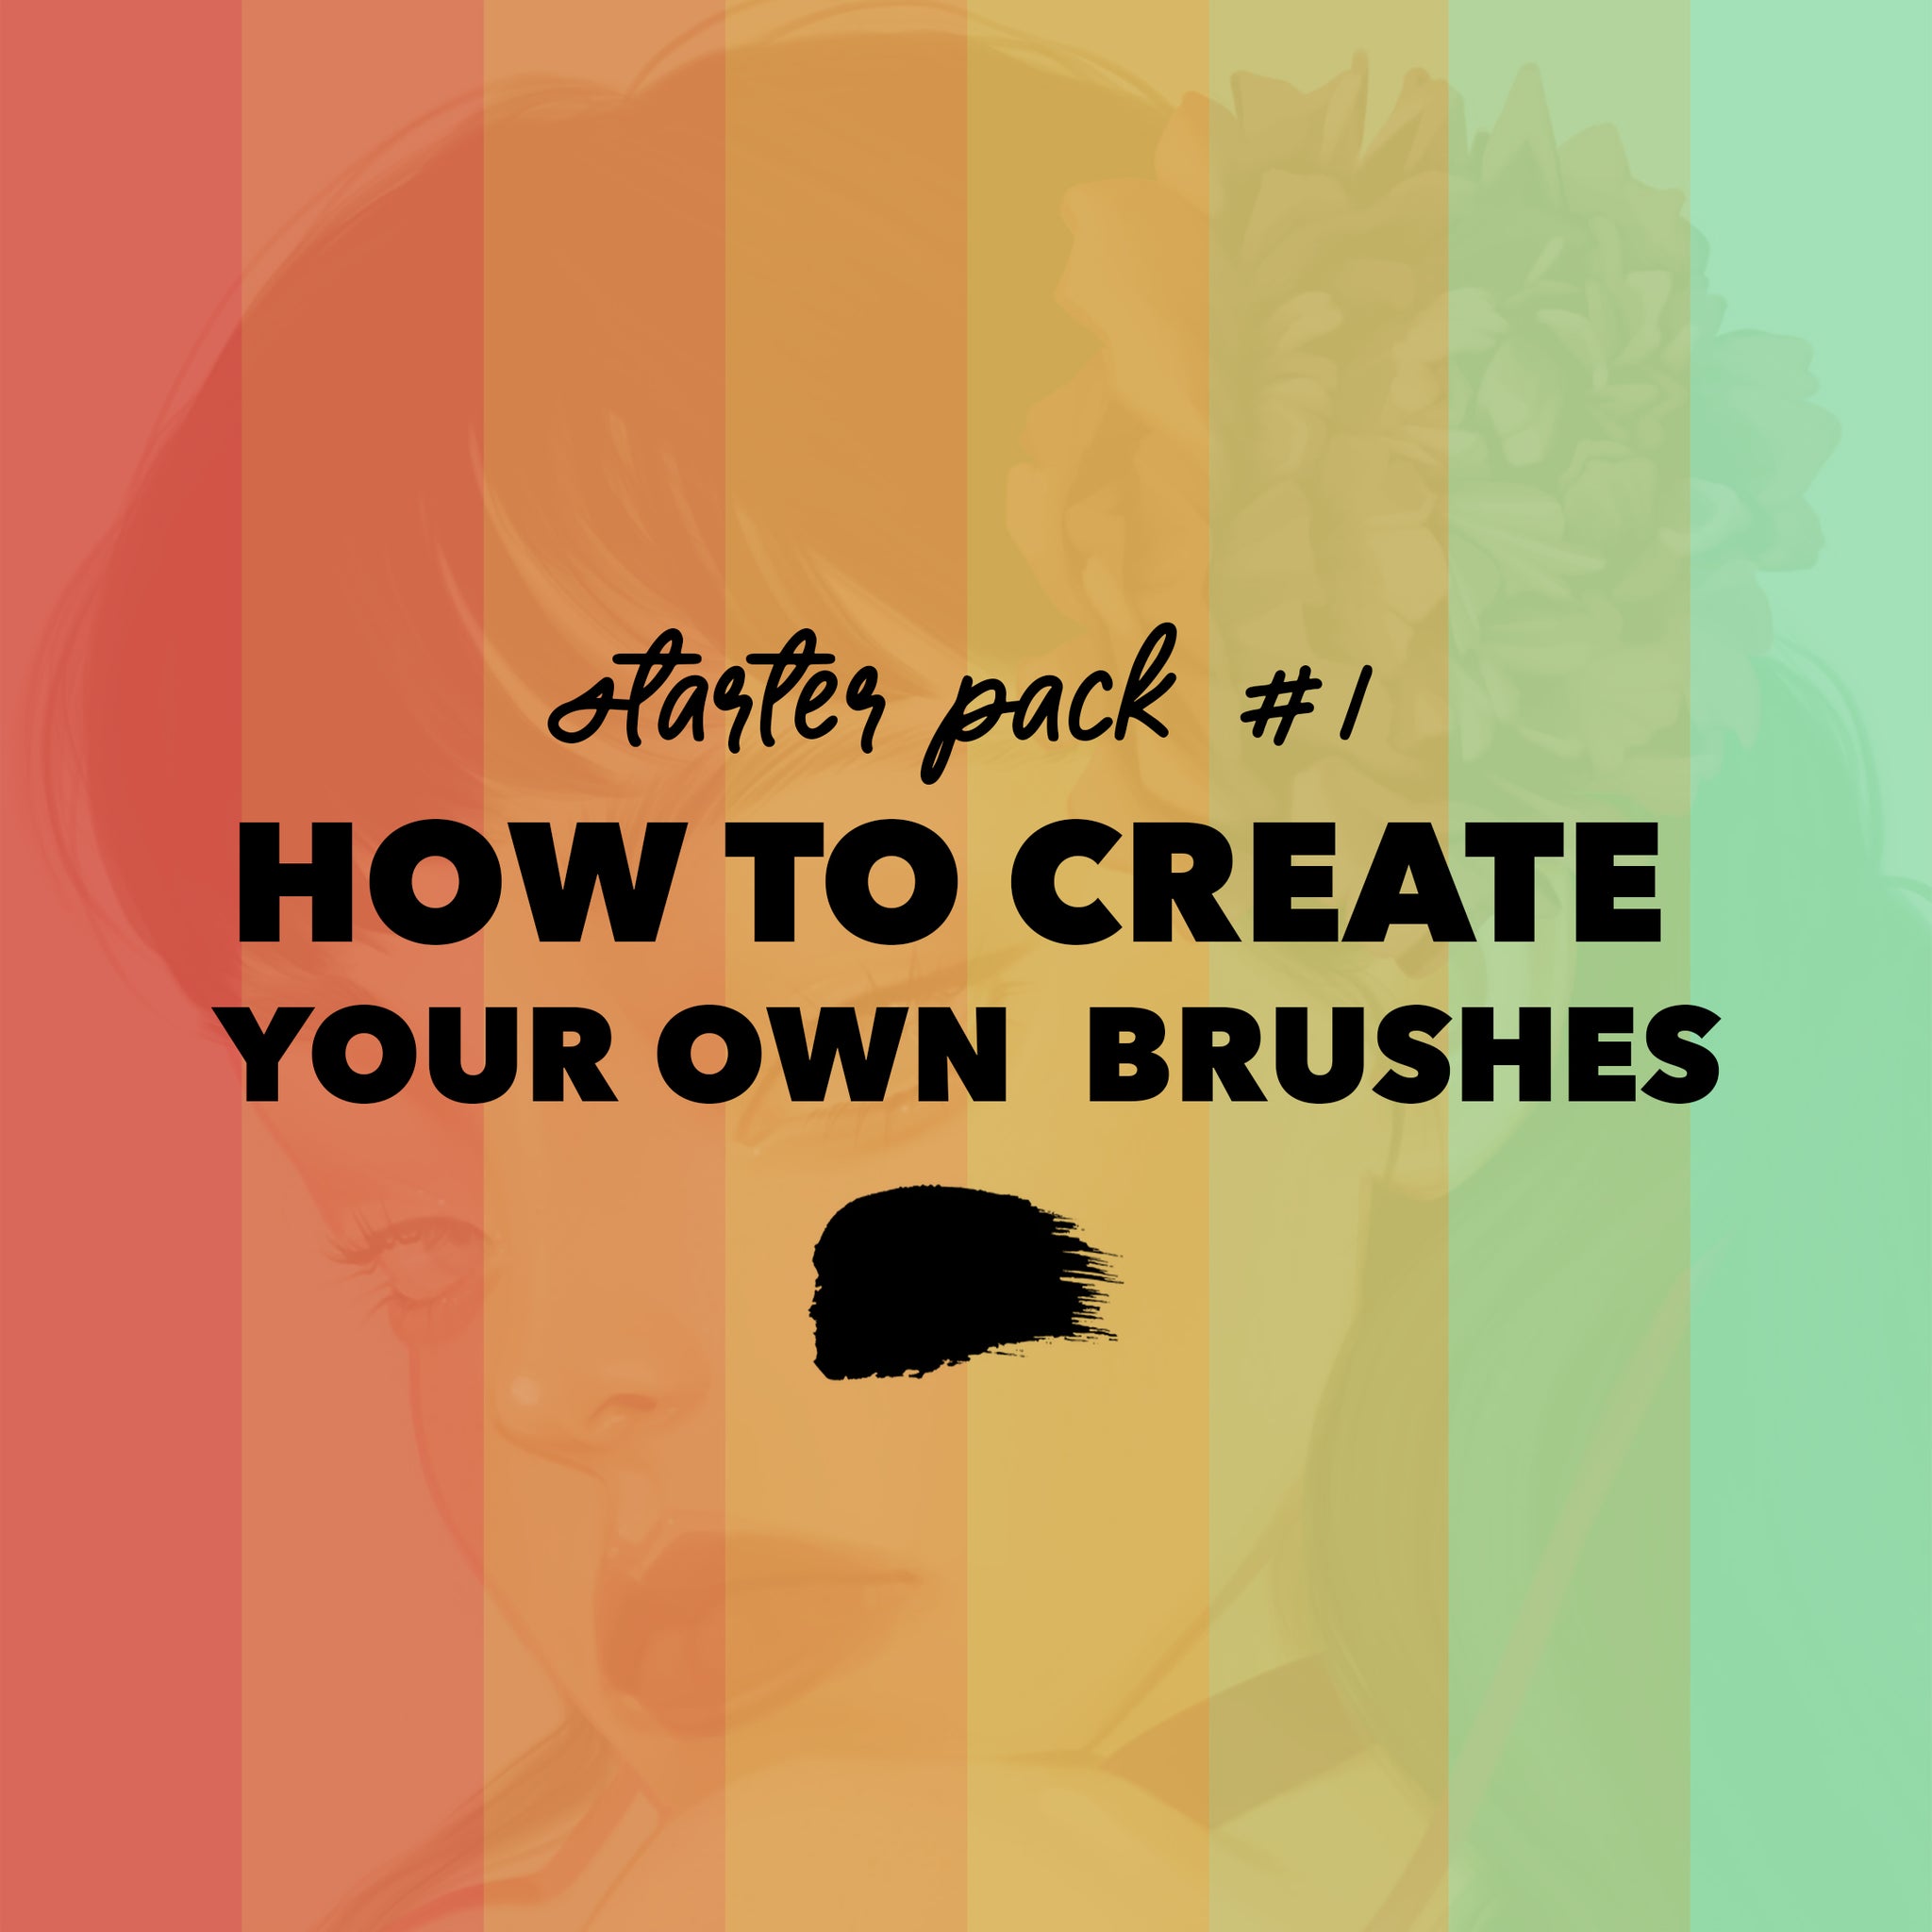 Haze Long Starter Pack #1 How to create your own brushes - Haze Long Fine Art and Resources Store